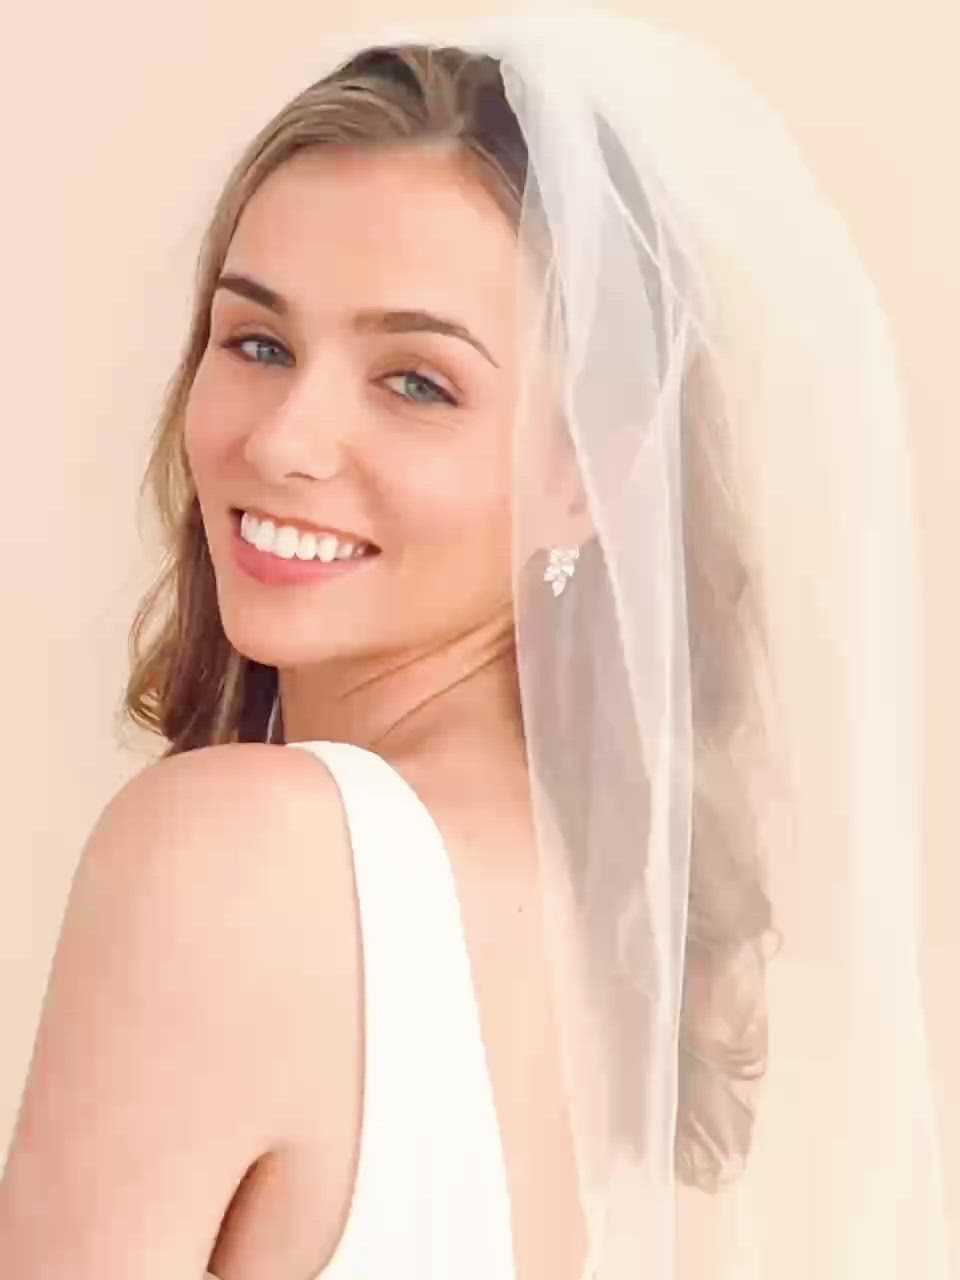 Olbye Women's Wedding Veil 108 Inch Cathedral Veil Single Tier 1T Long Veils  for Brides Soft Sheer Ivory Veil (Light Ivory) at  Women's Clothing  store